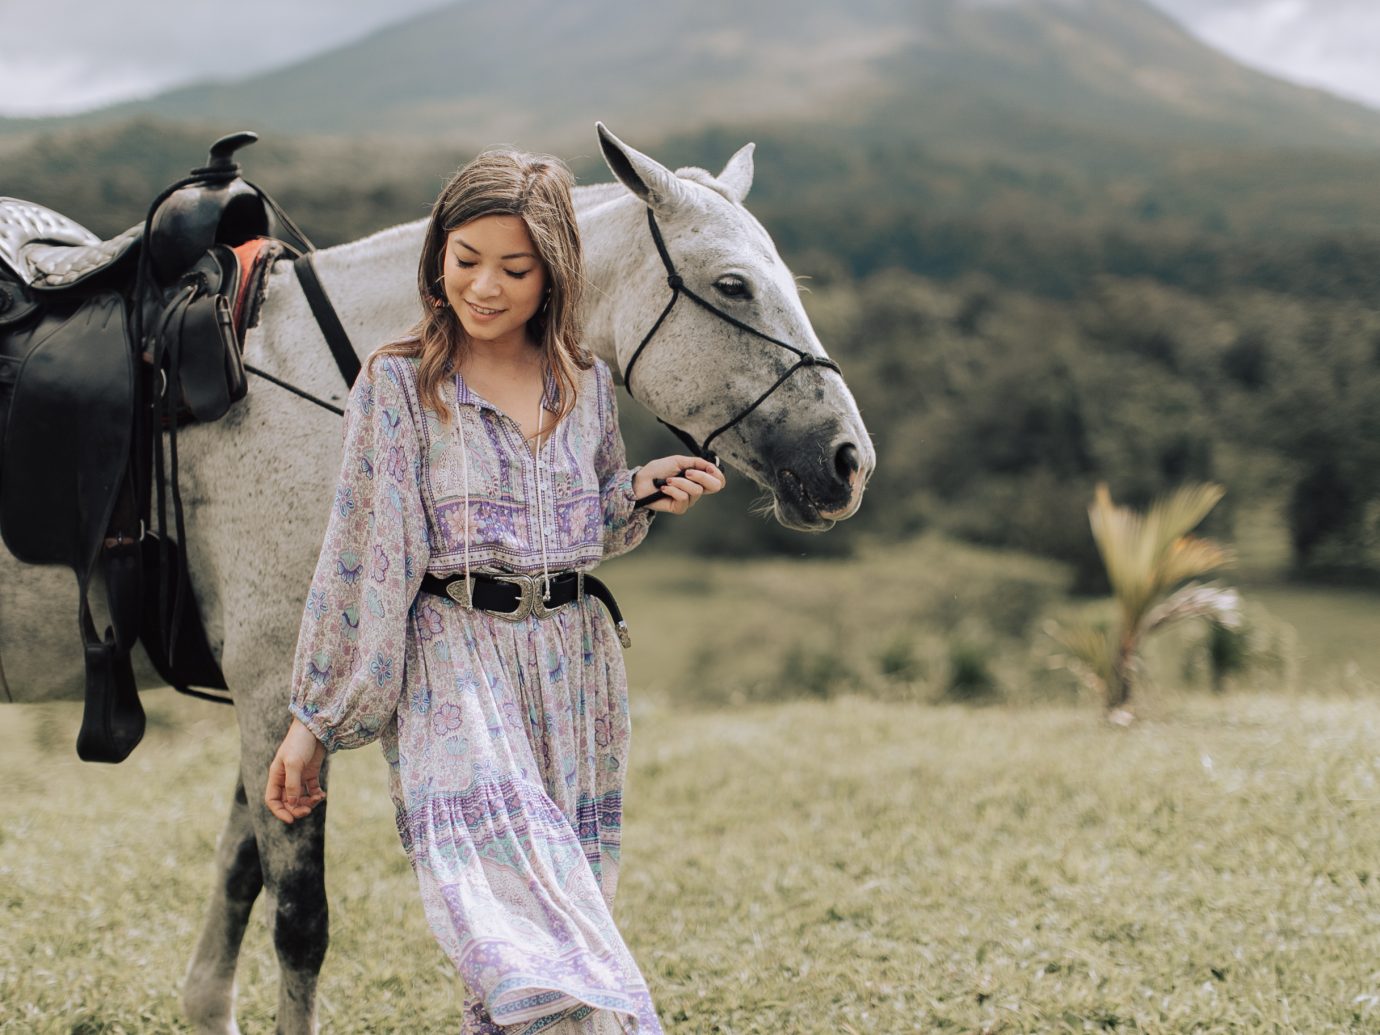 Girl with a horse in Costa Rica